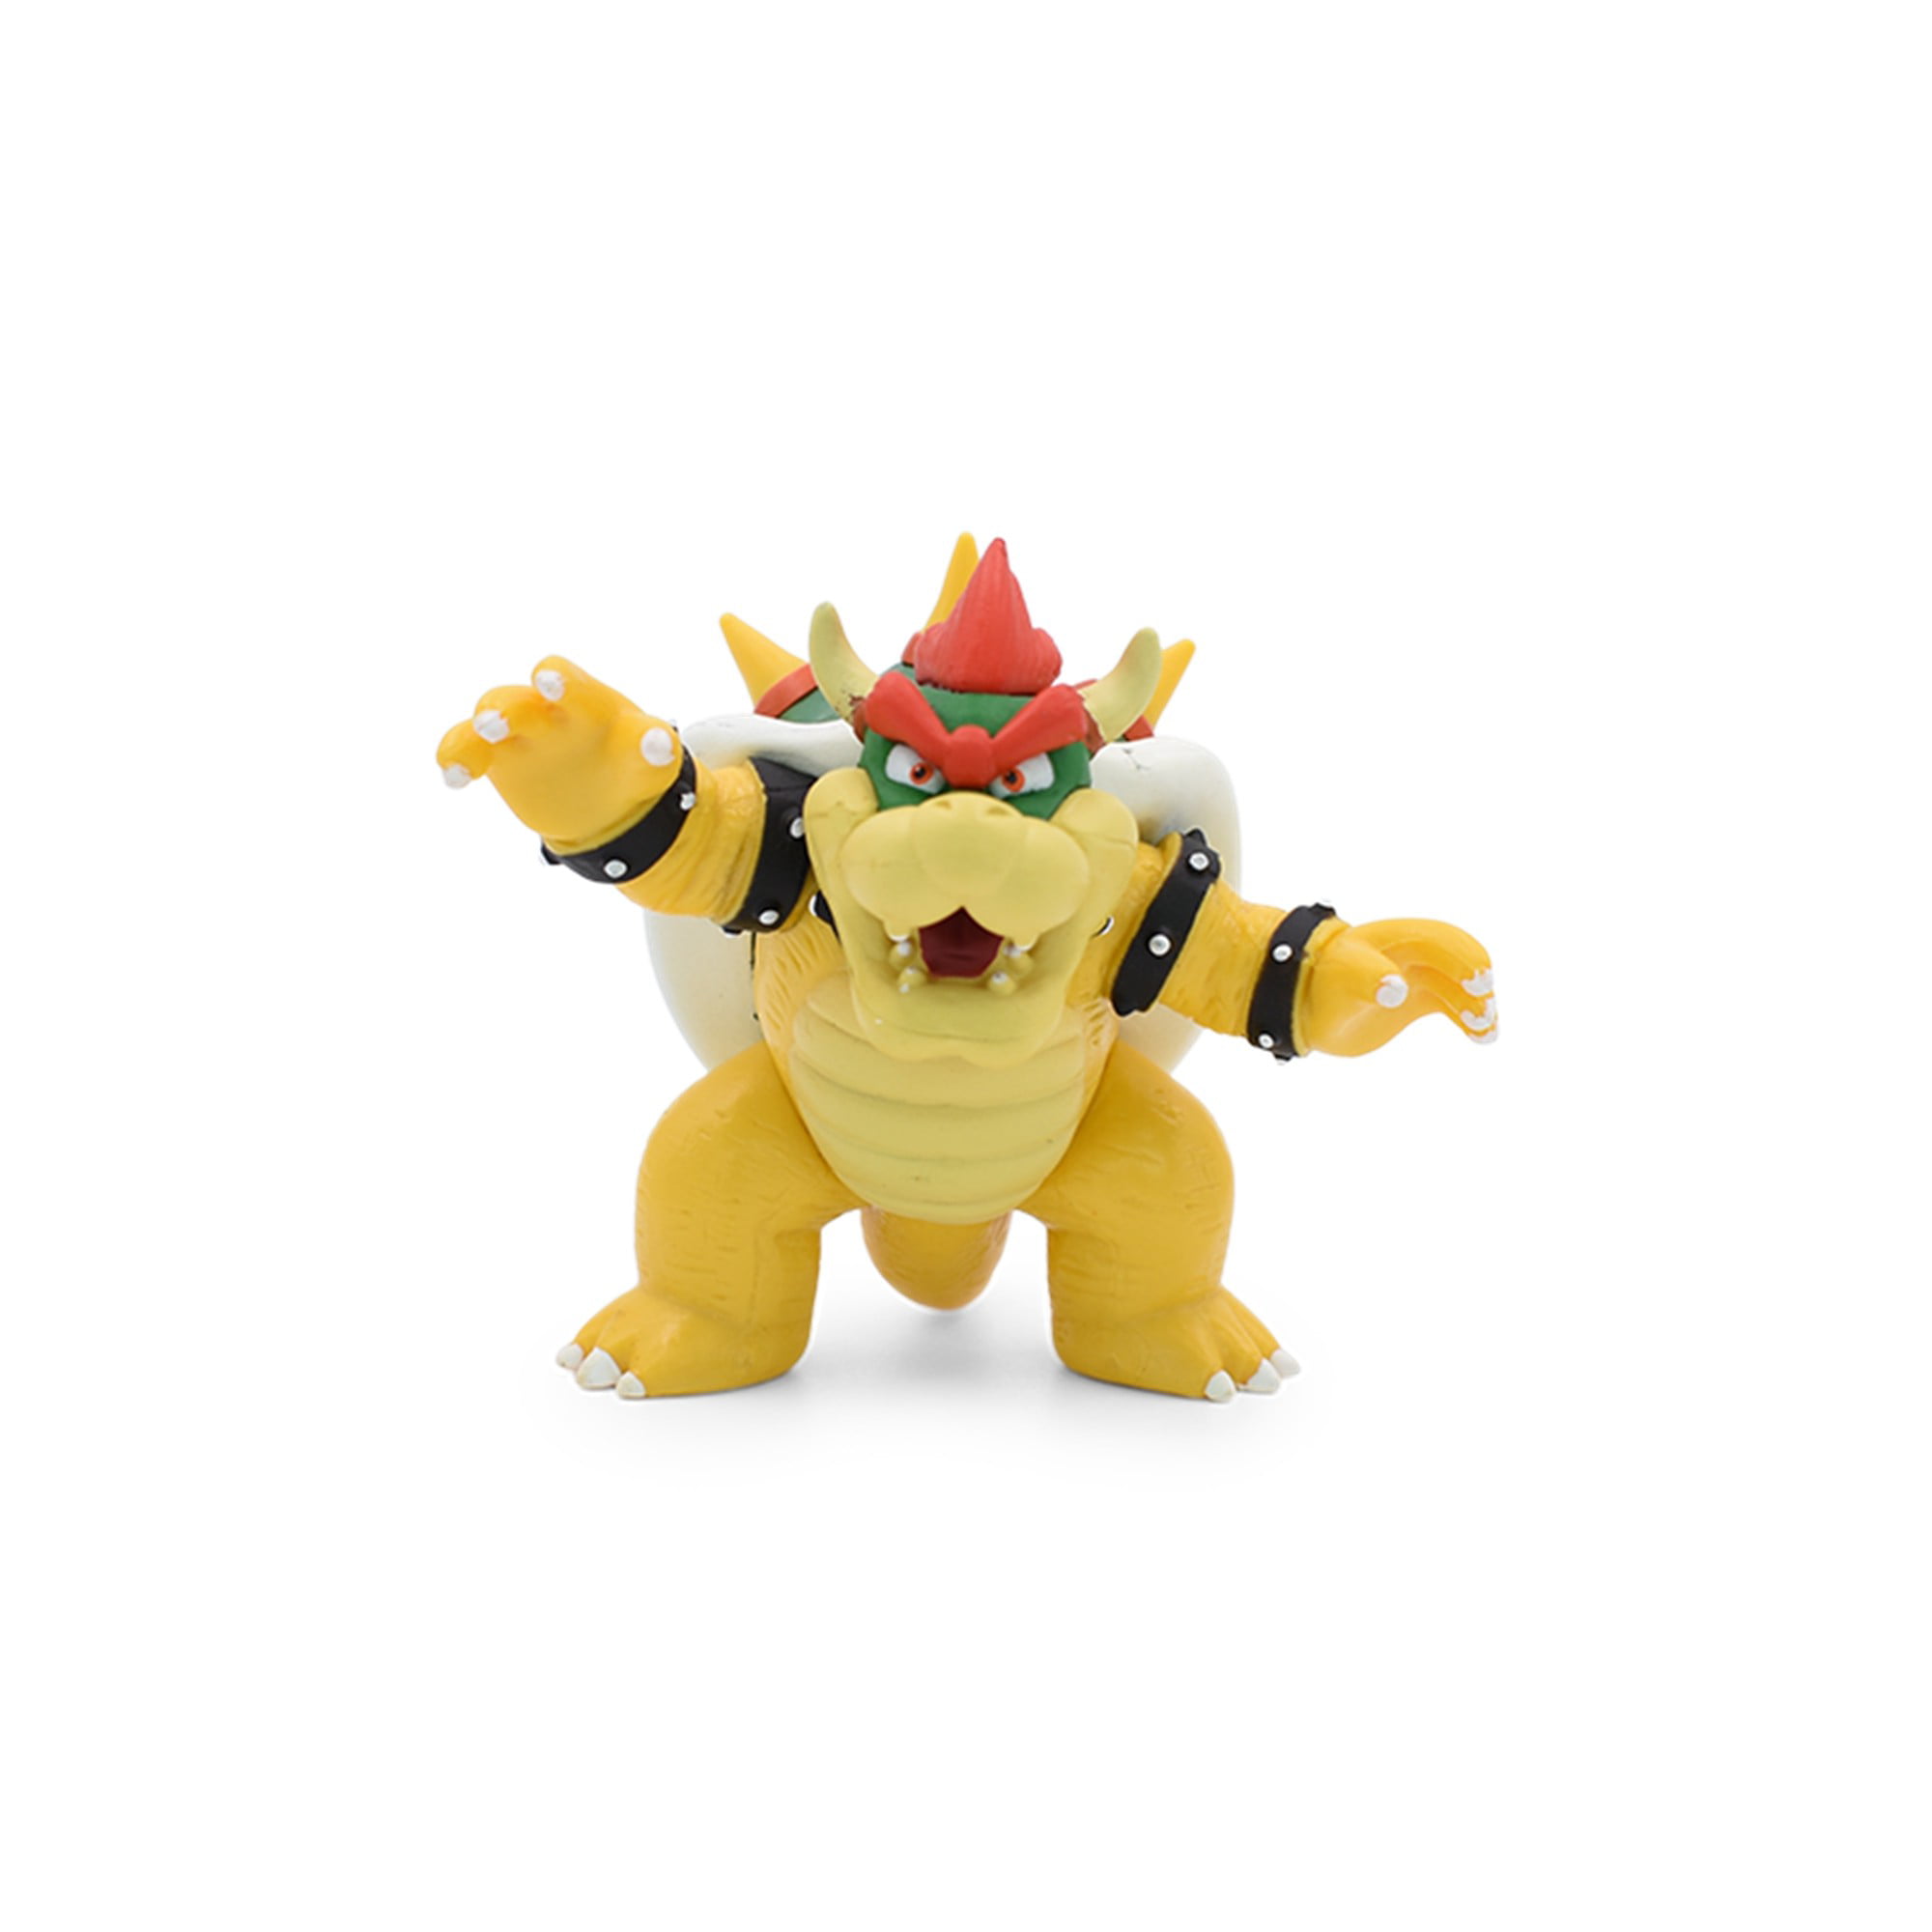 Super Mario Bowser Koopa Action Figure Anime Toy Doll Gift Collect Decor Hot 4" 